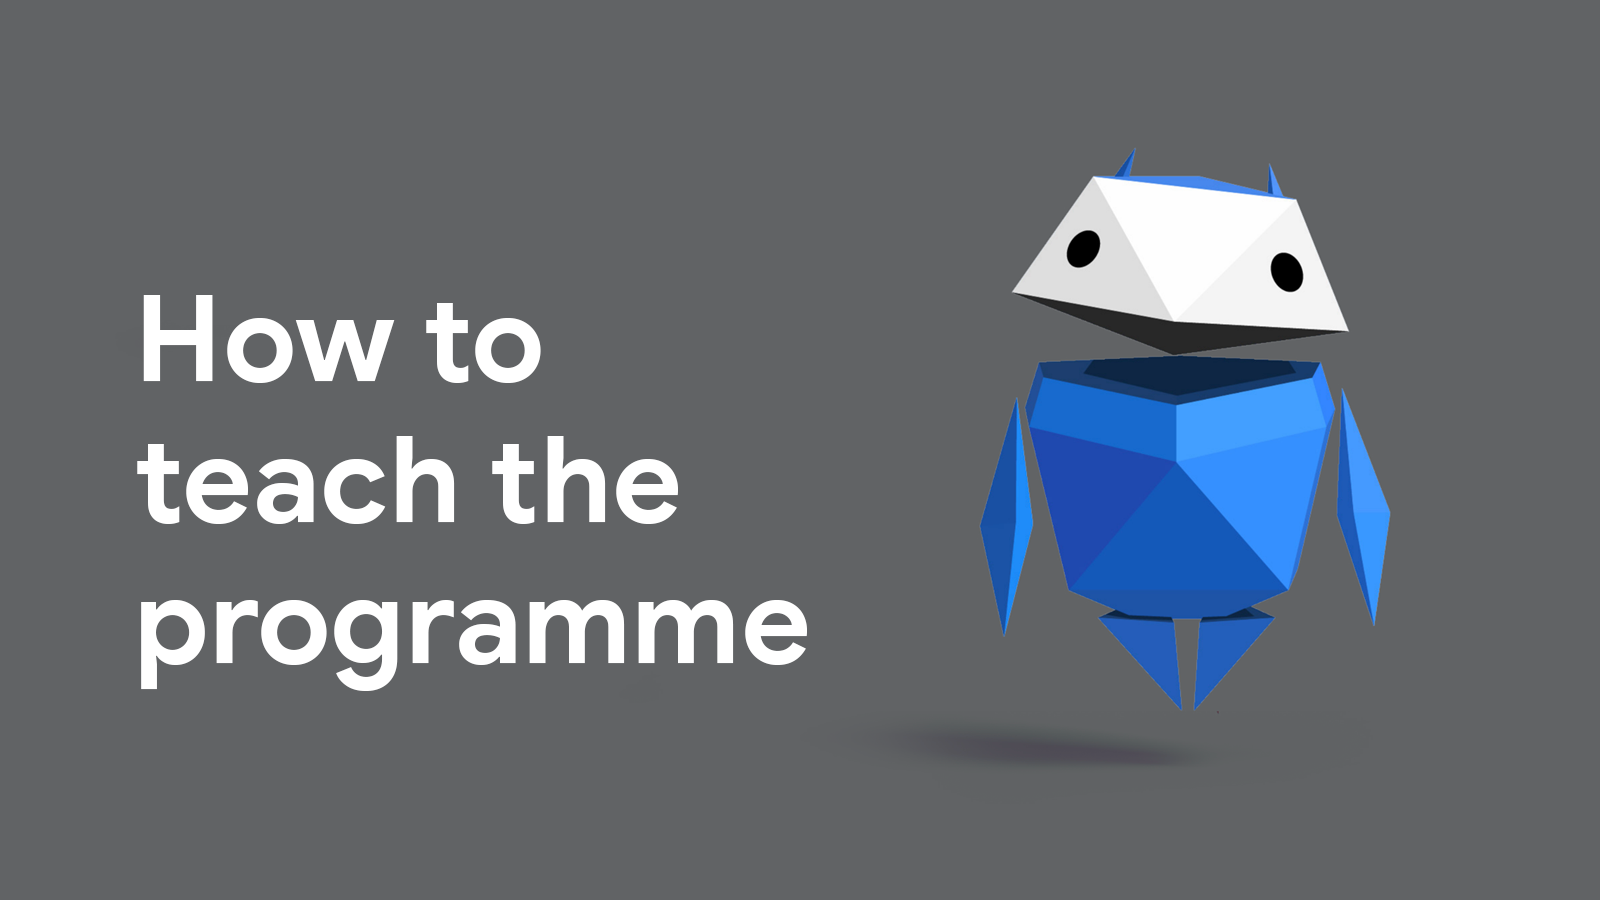 How to teach the programme